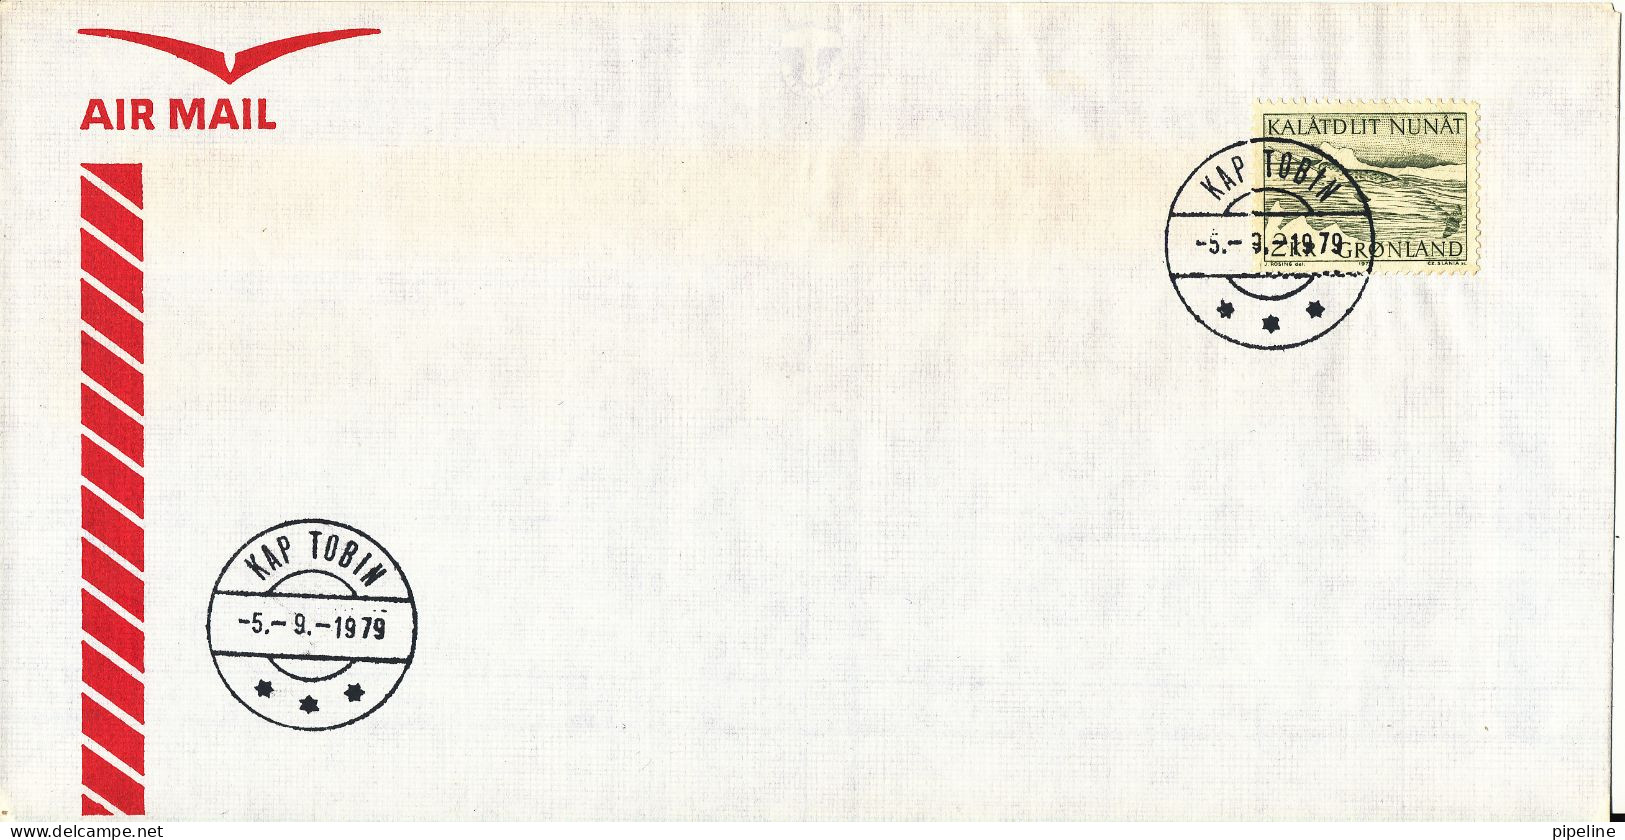 Greenland Cover Kap Tobin 5-9-1979 Single Franked And Nice Postmark - Covers & Documents